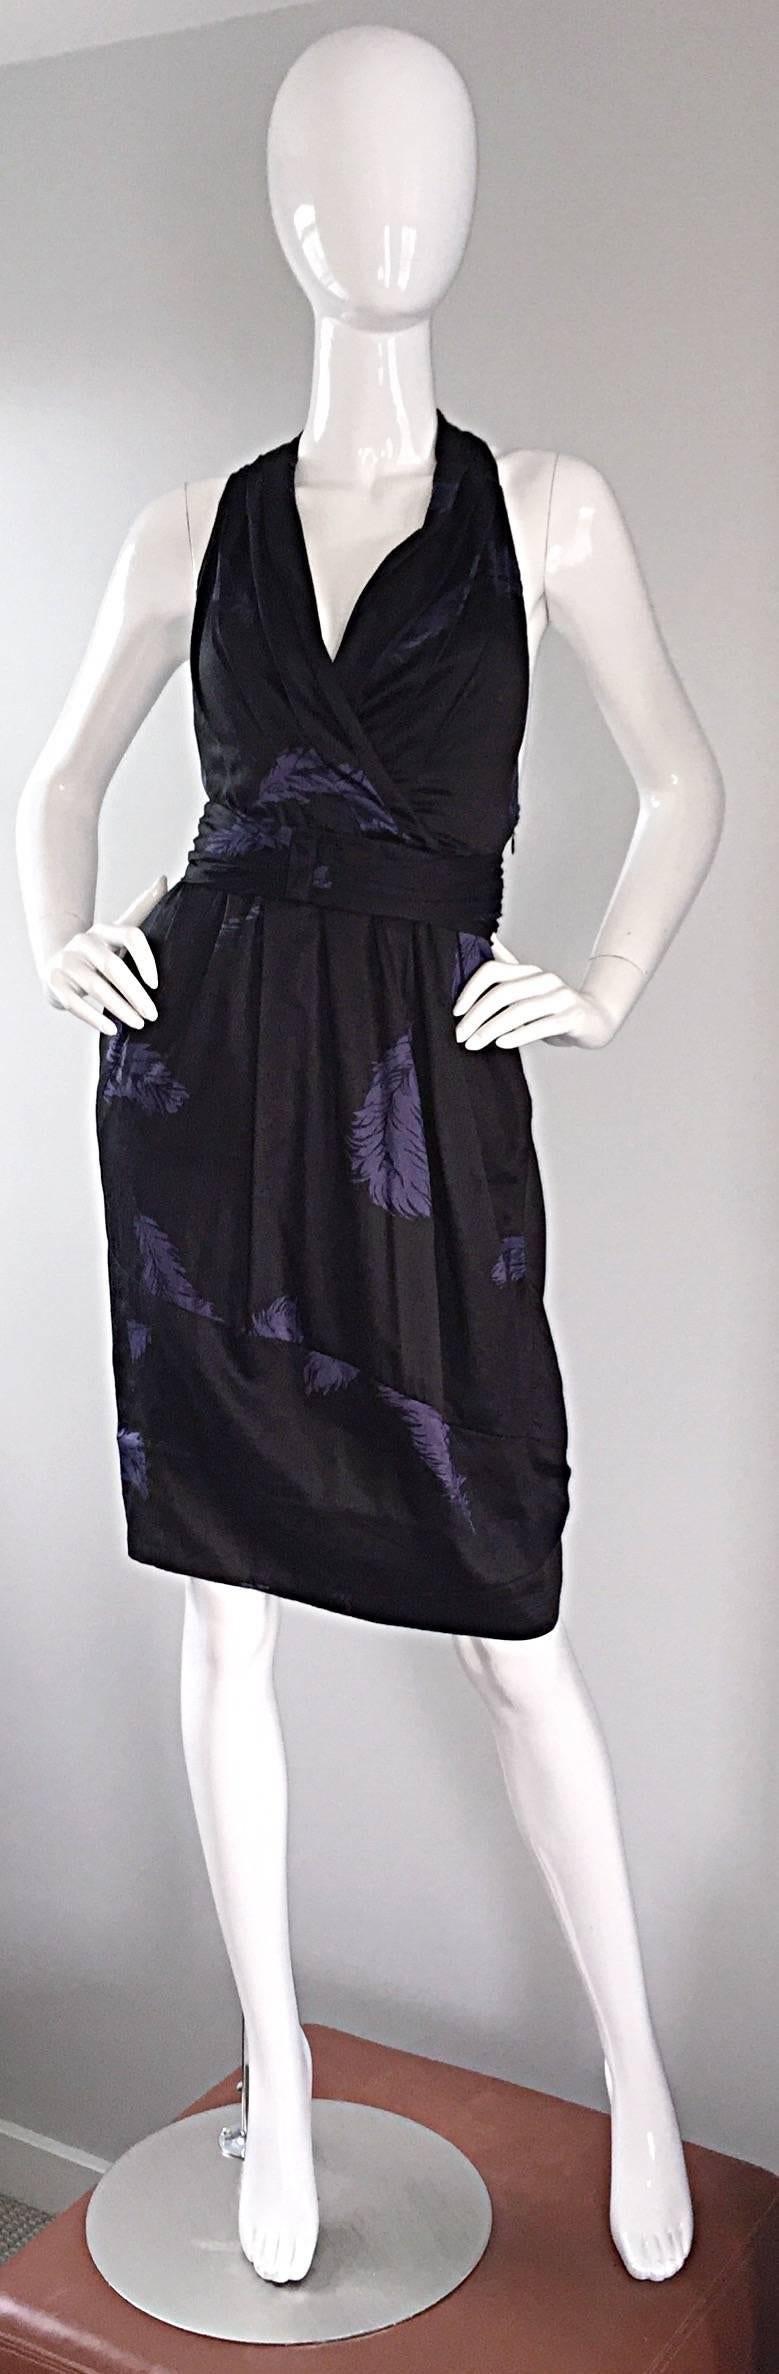 Utterly chic Marc Jacobs Collection (Main/High Line) dress! Features purple peacock feathers printed throughout. Soft black cotton. Racerback that wraps around the waist, with hook-and-eye closures (at waist), that form a cummerbund. Full bubble